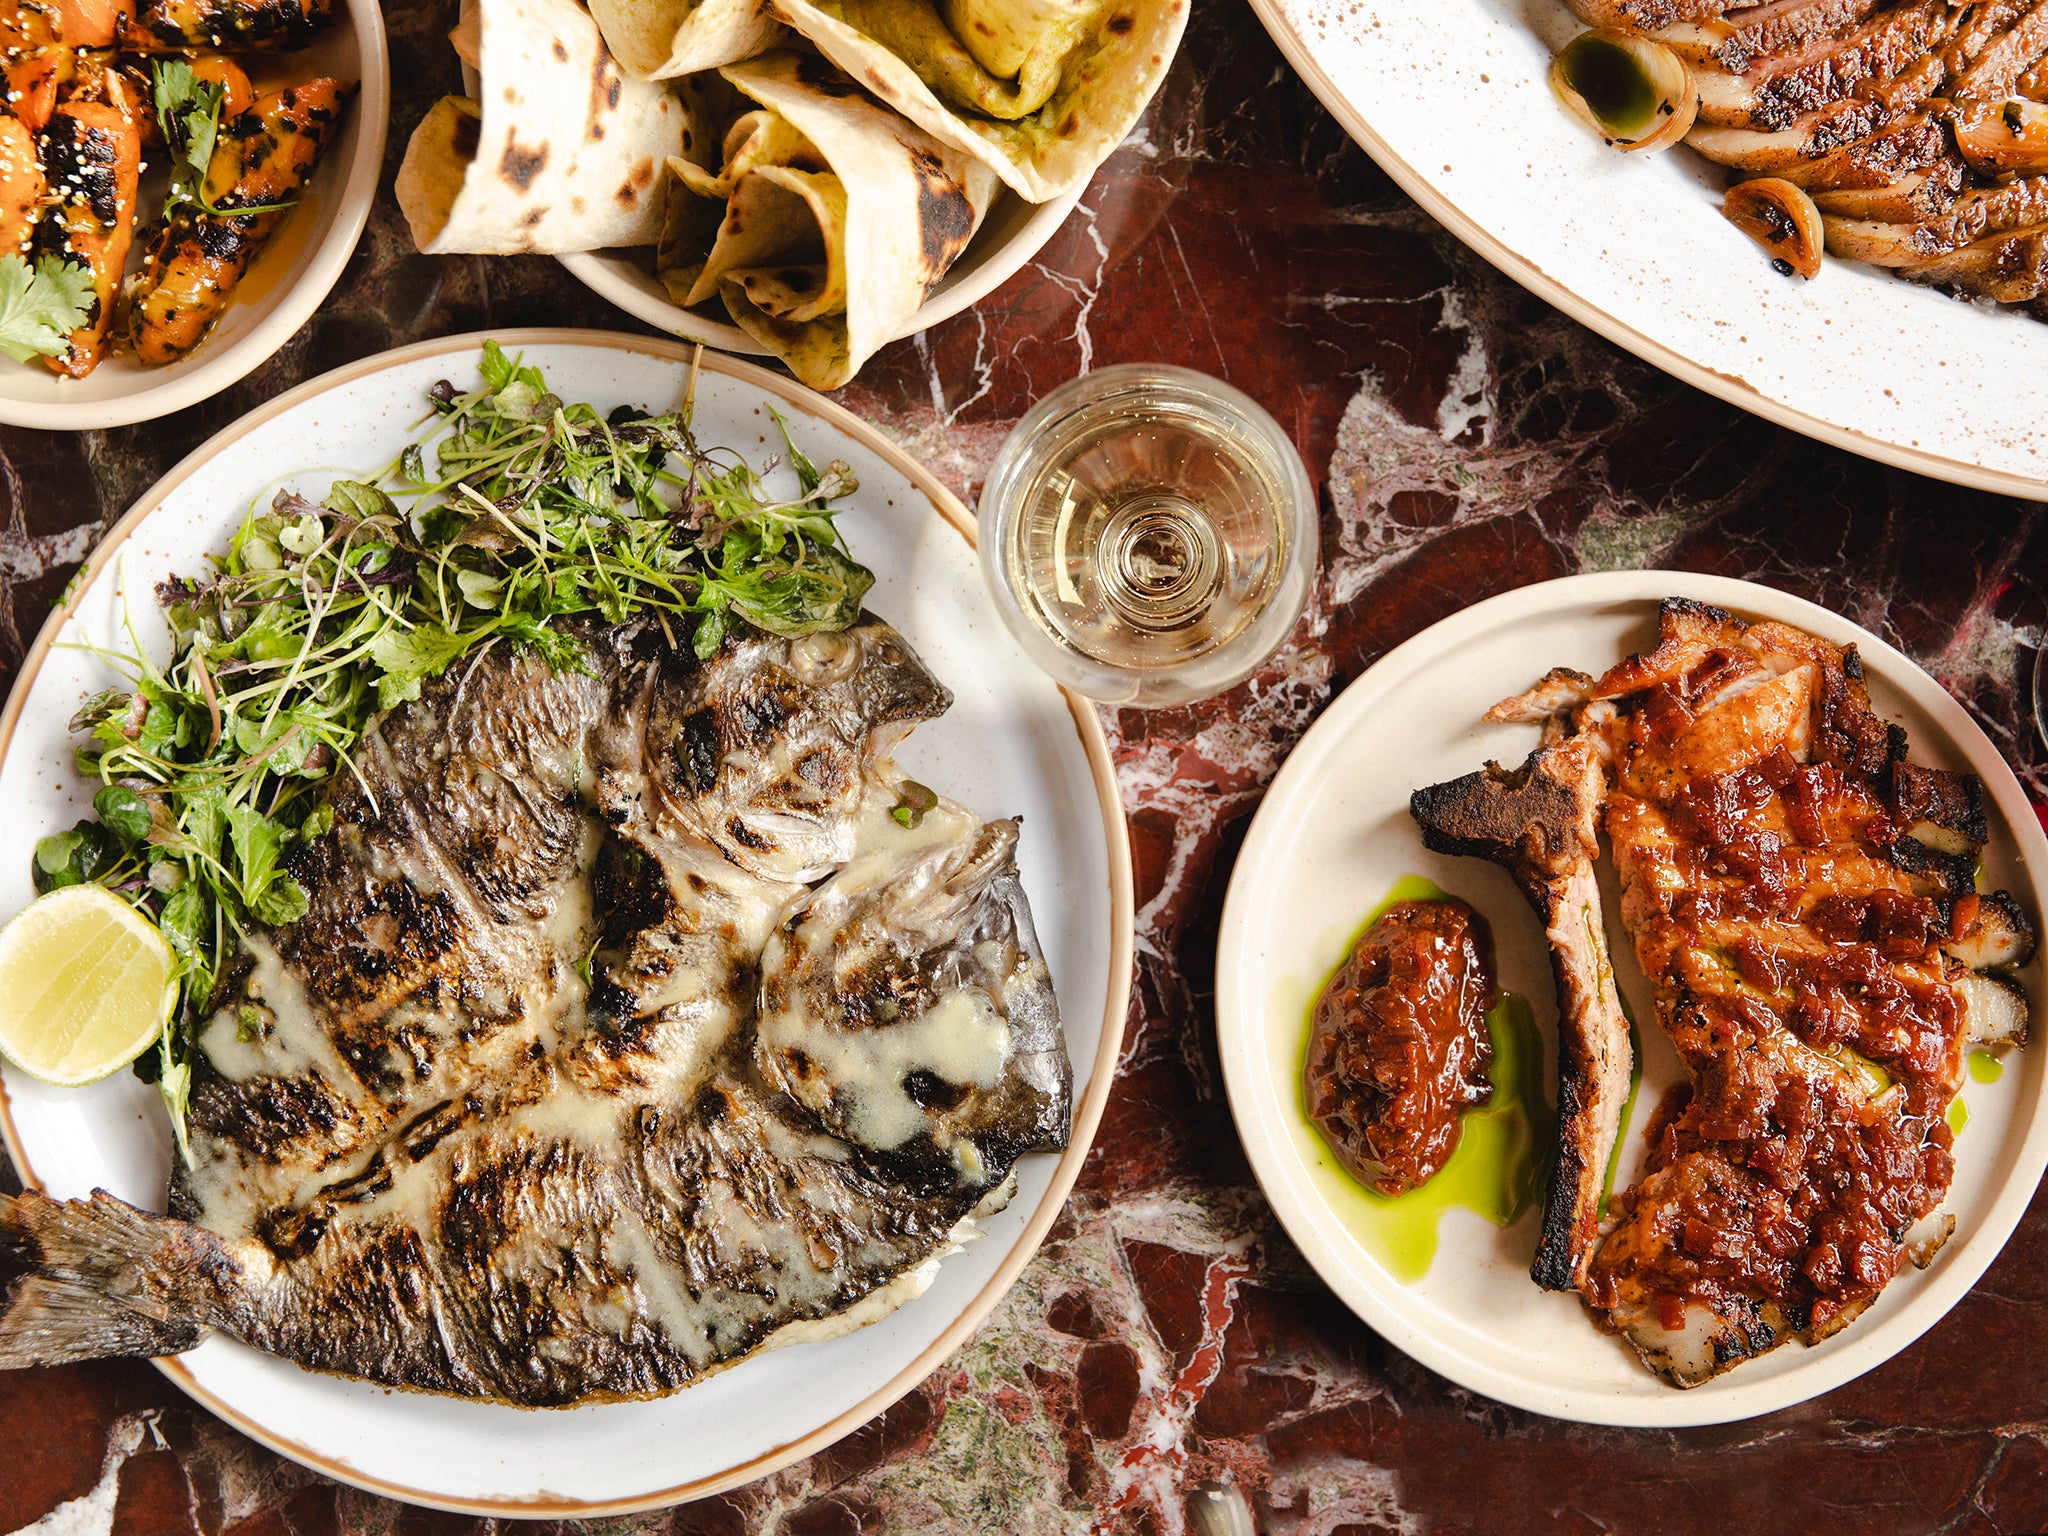 There’s a reason hungry Londoner’s have been flocking to Peckham since Kudu opened in 2018...